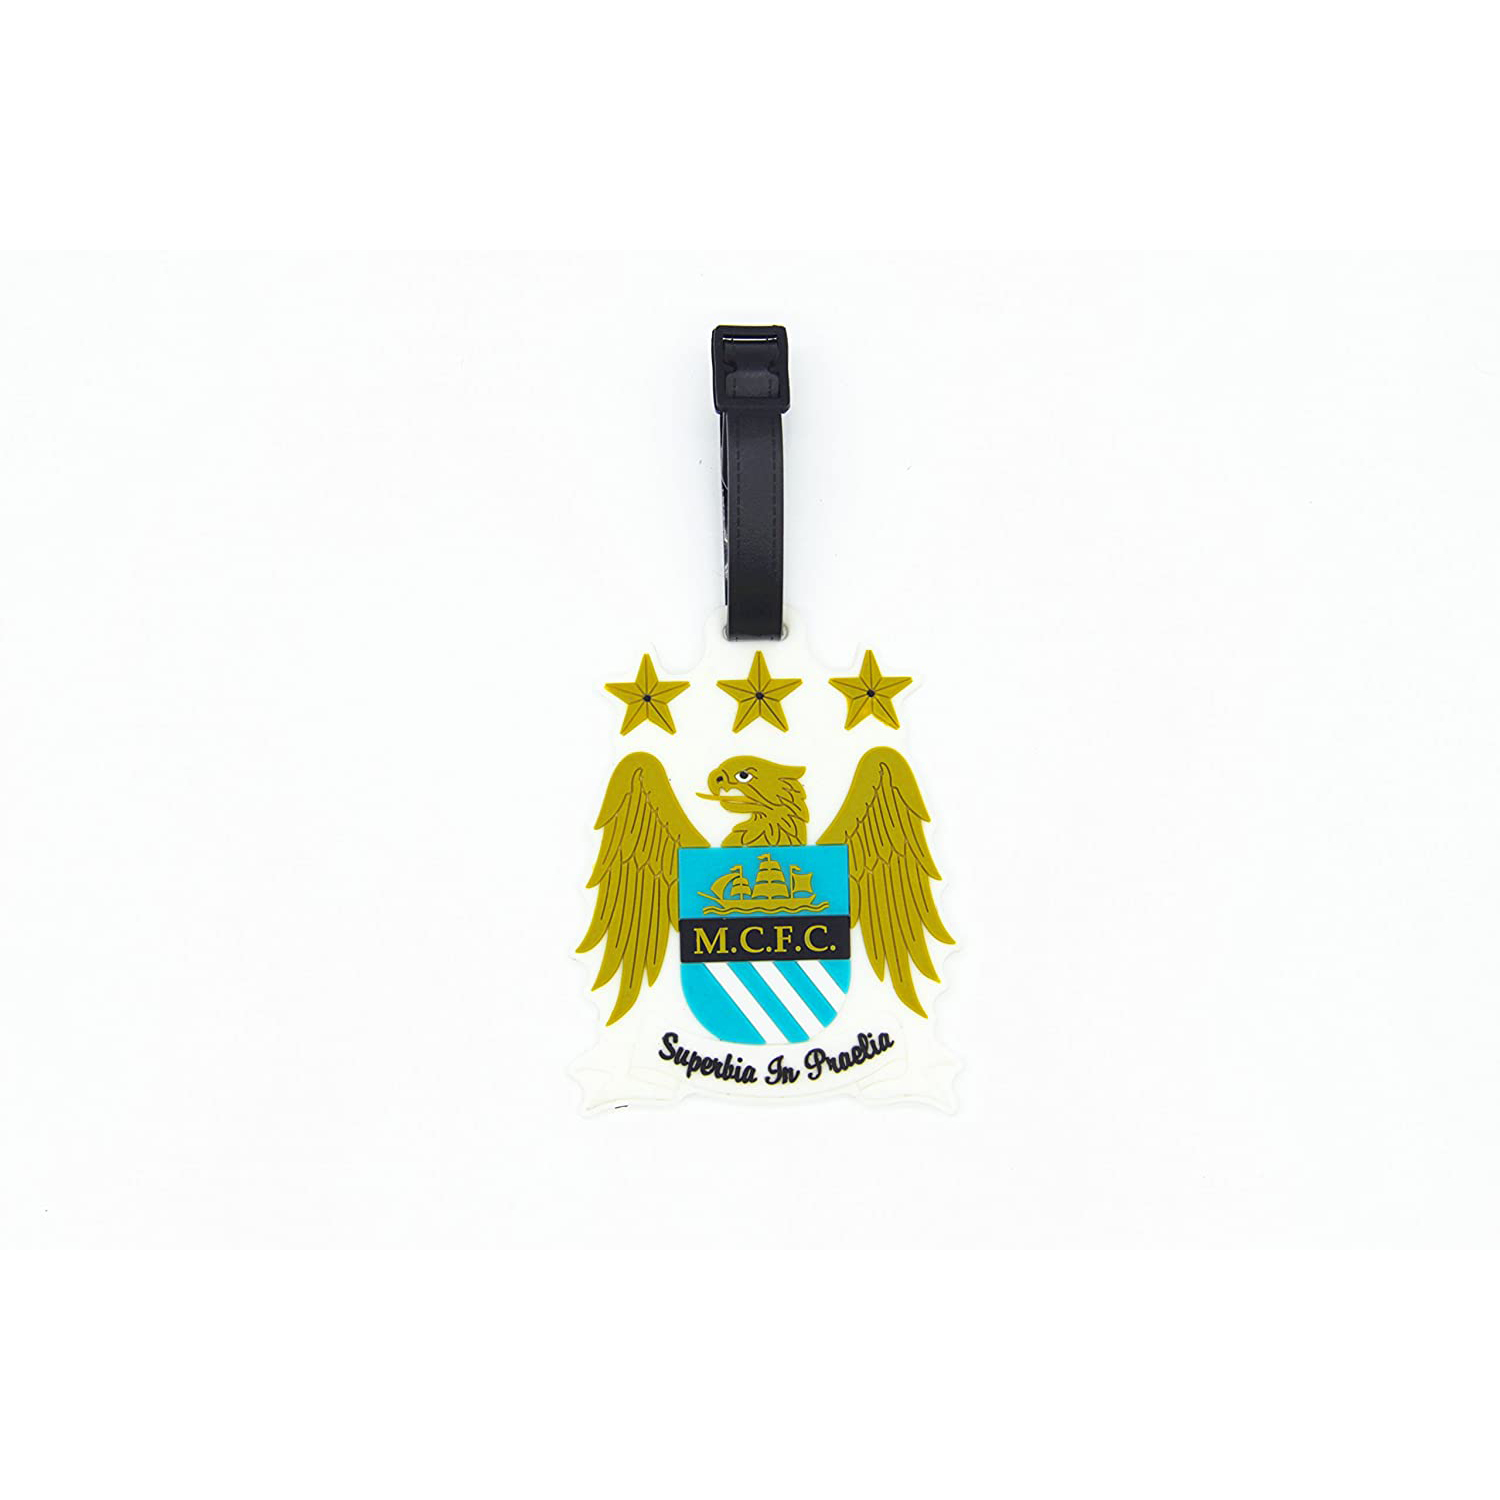 High Quality Set of 2 Soccer Team Football Club Luggage Tag Suitcase ID Tag with Adjustable Strap